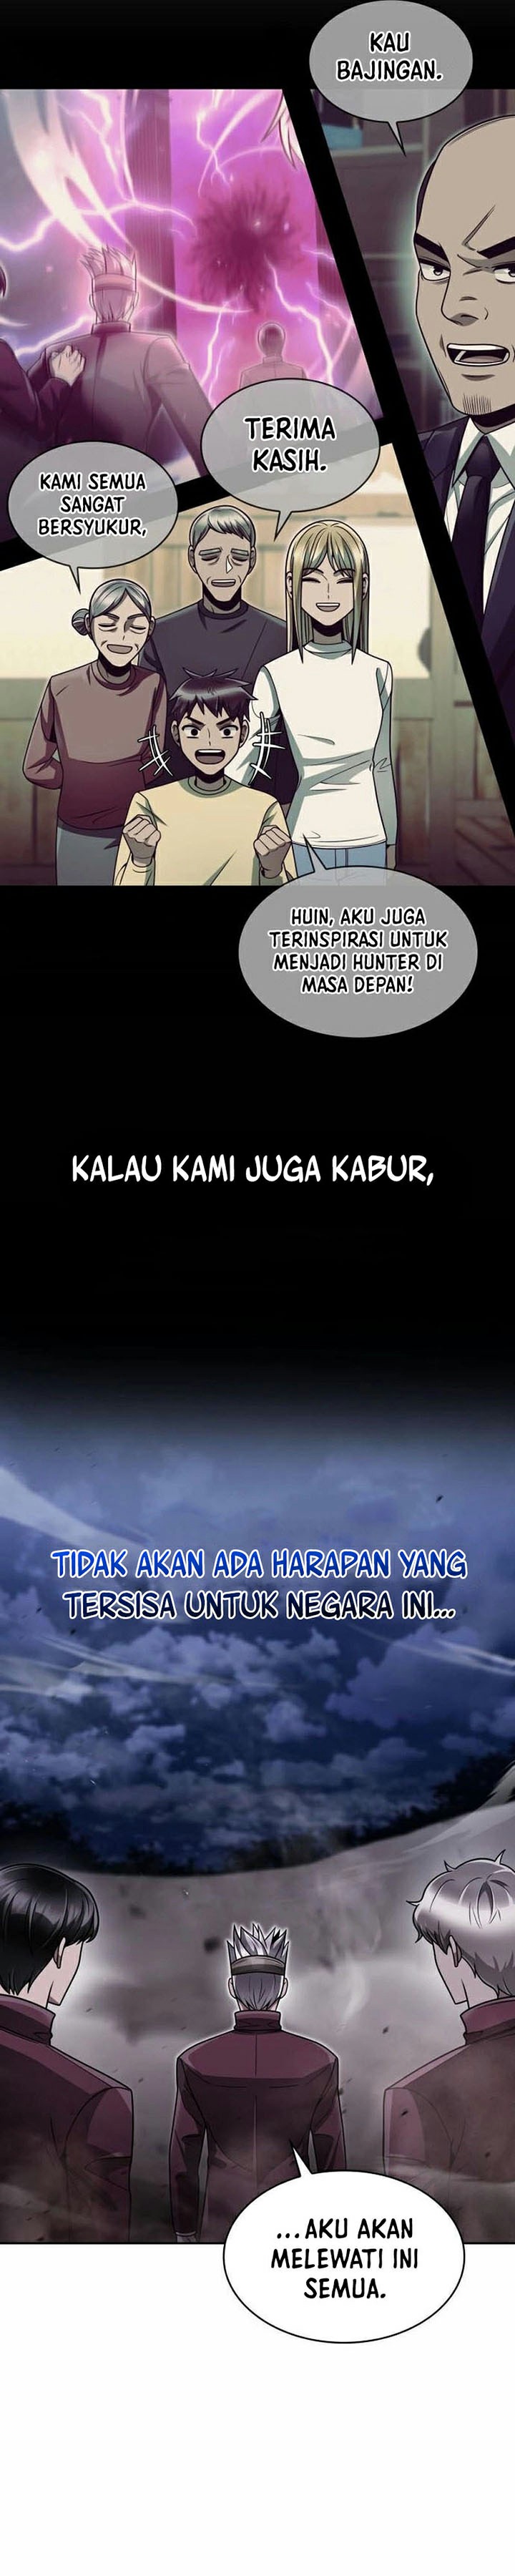 Dilarang COPAS - situs resmi www.mangacanblog.com - Komik clever cleaning life of the returned genius hunter 060 - chapter 60 61 Indonesia clever cleaning life of the returned genius hunter 060 - chapter 60 Terbaru 9|Baca Manga Komik Indonesia|Mangacan